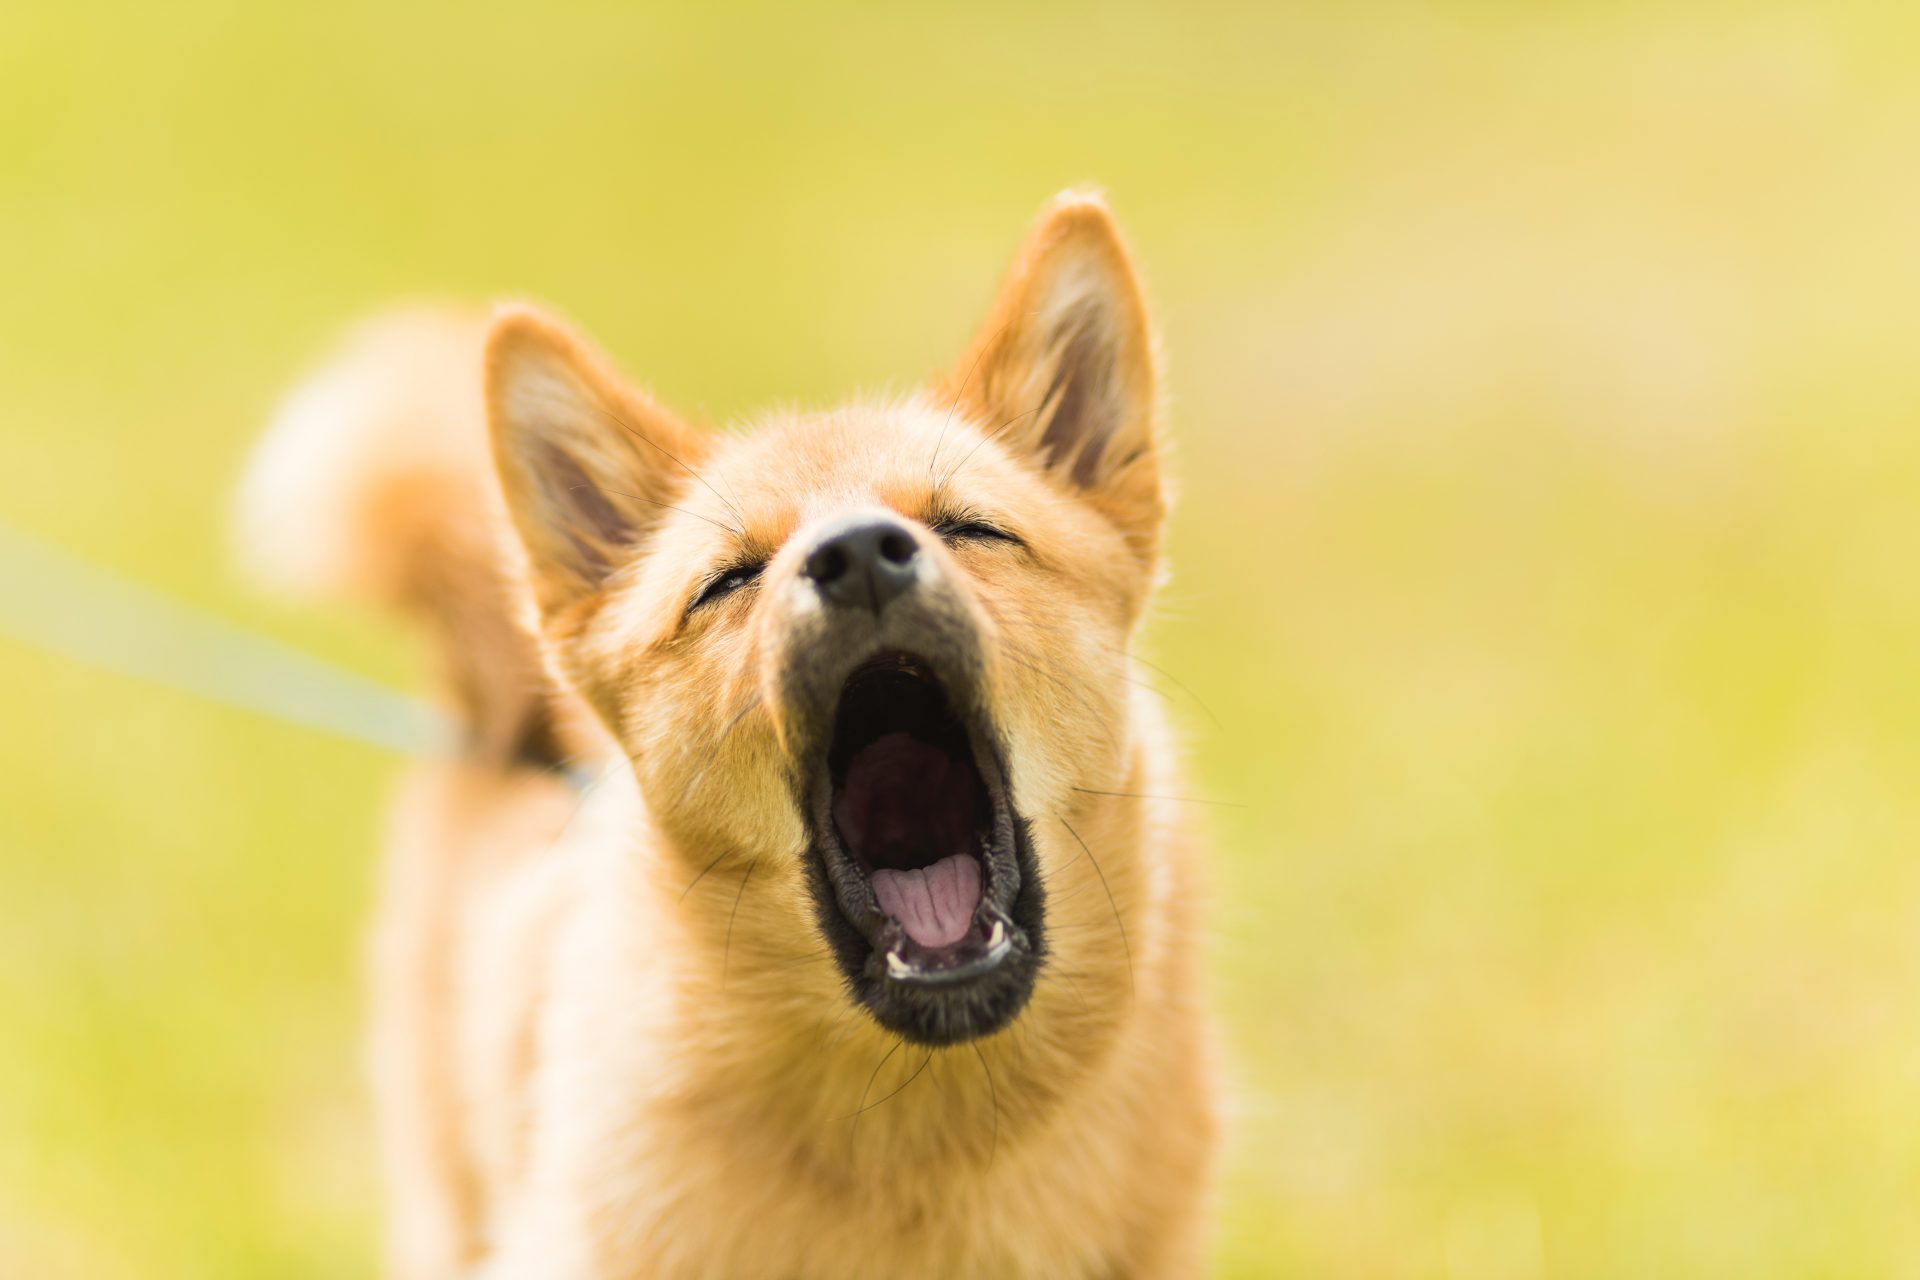 Yawning can mean different things